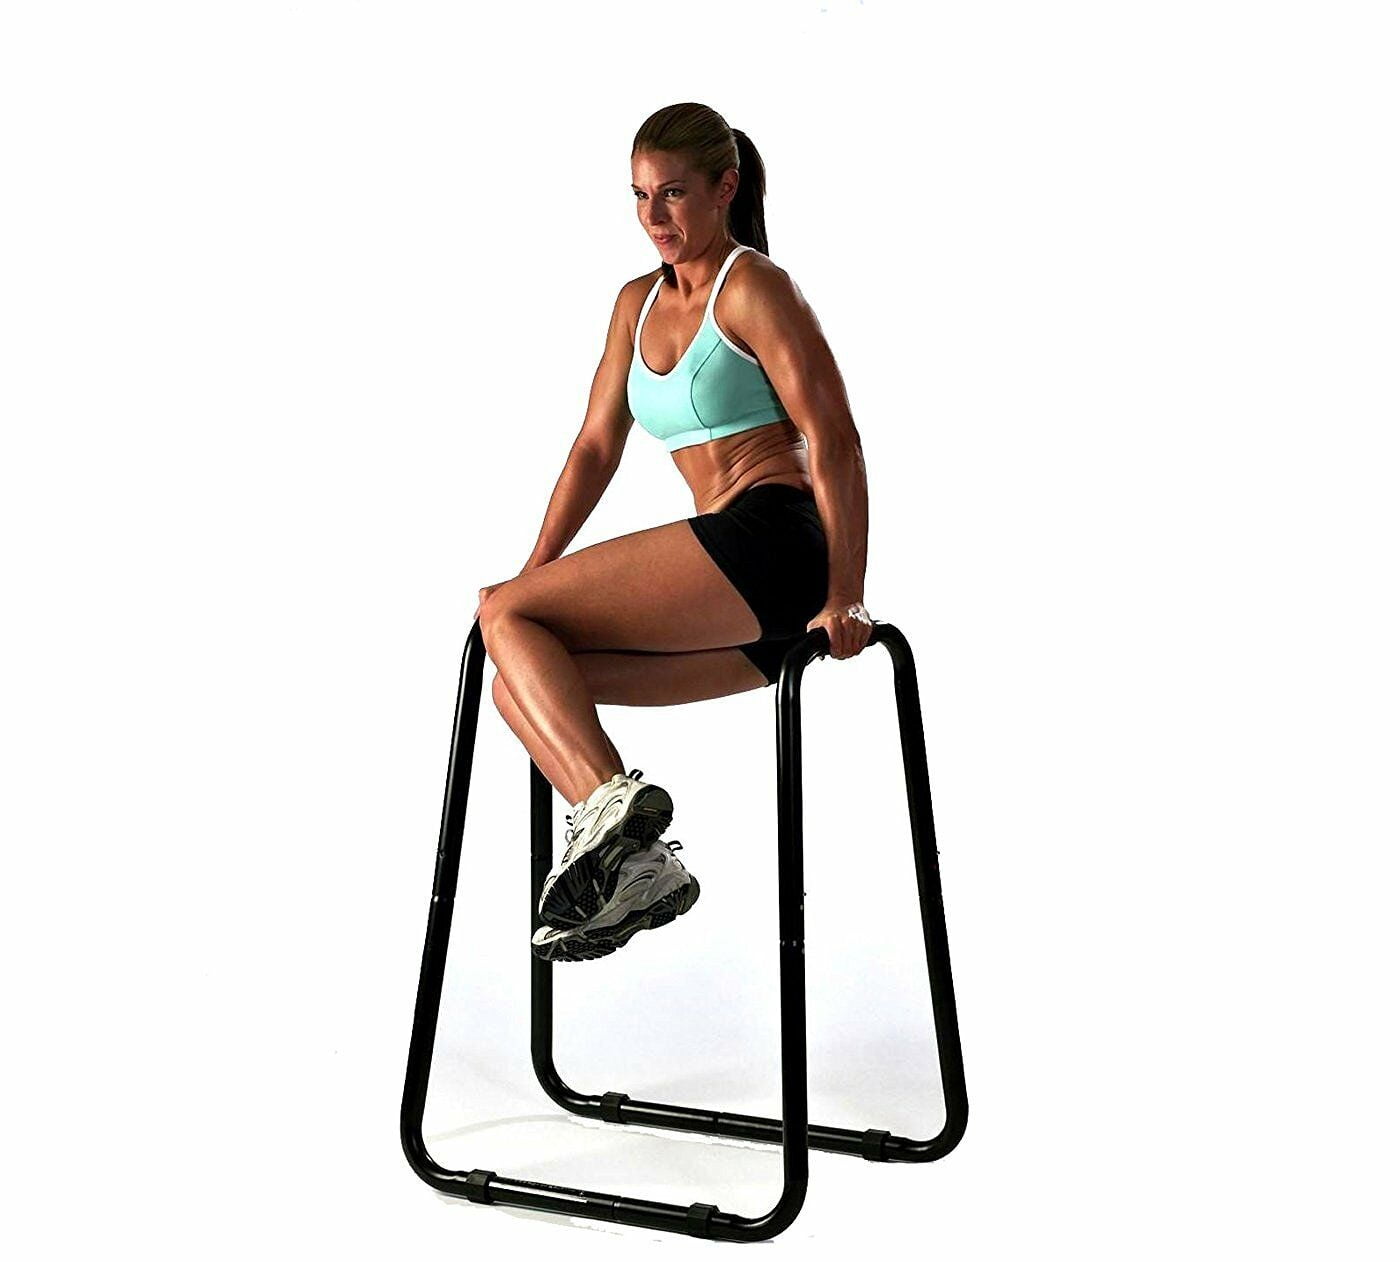 Cocoarm Dip Stations Strength Training Dip Stands Assembled Indoor Parallel Bars Dip Stand Dip Bar Knee Raise Station Pull Up Parallel Bar for Home Gym Fitness Exercise